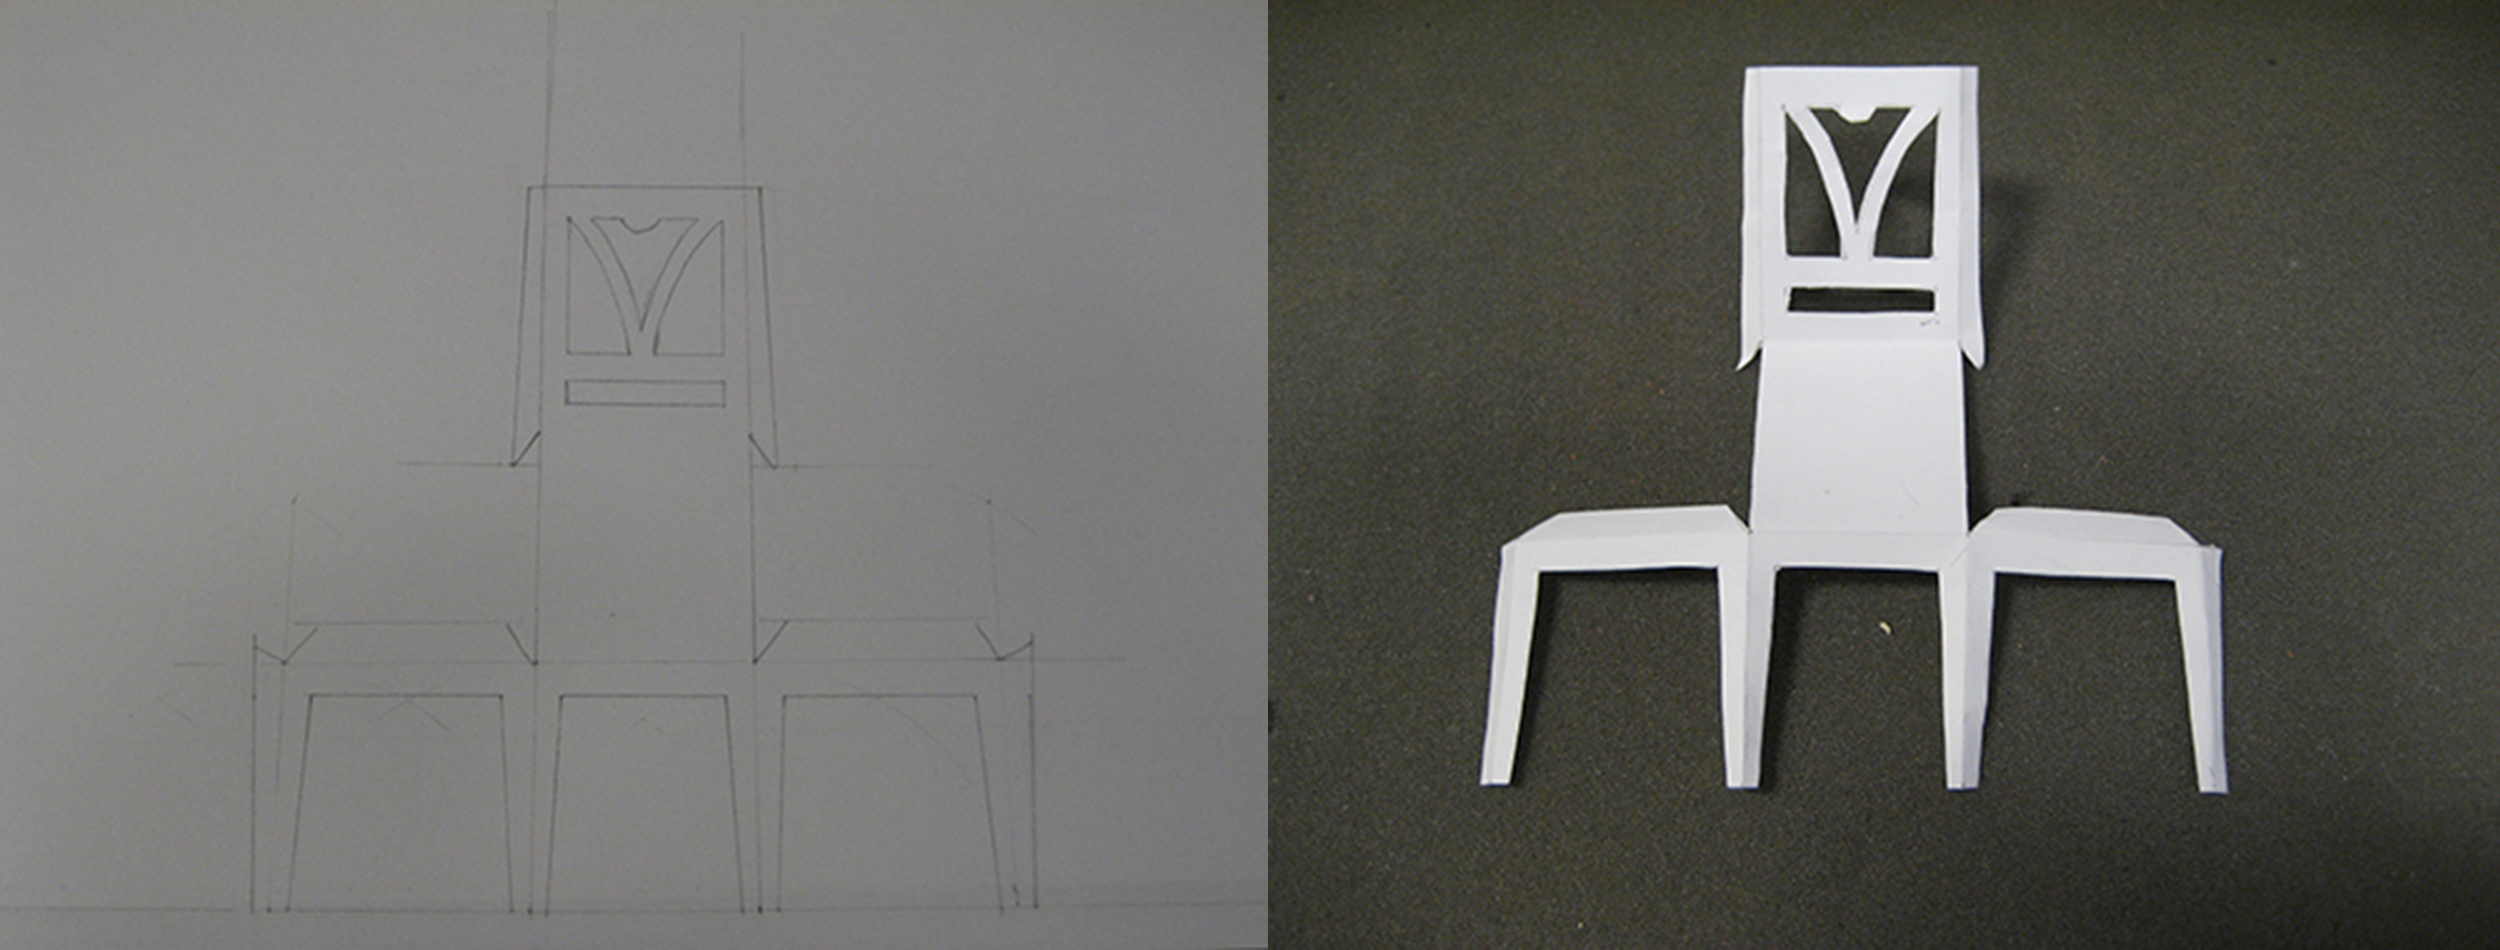 My drawing of the chair template, and the cut-out template ready for assembly.